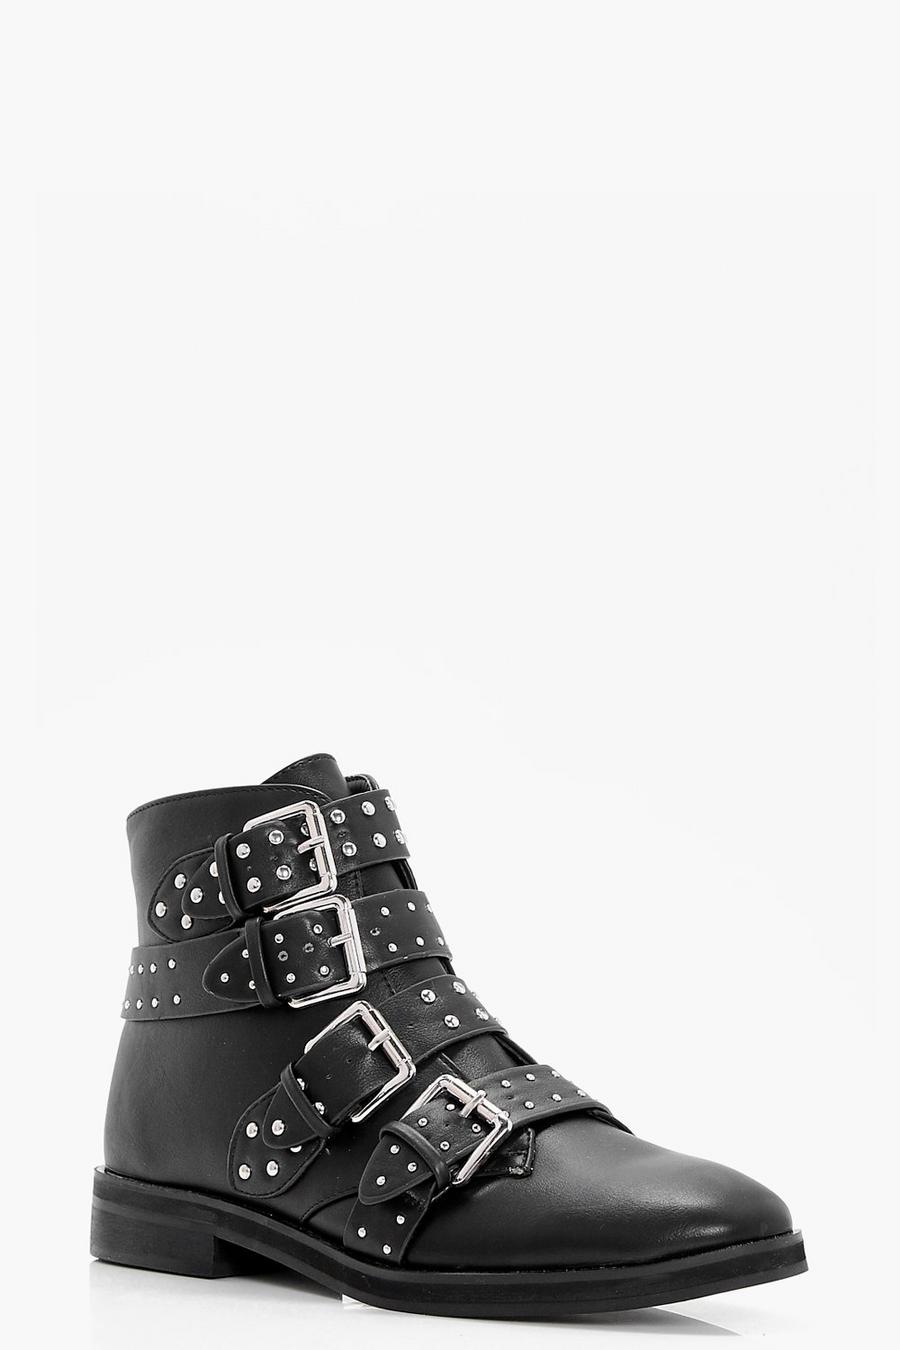 Black Studded Strap Ankle Boots